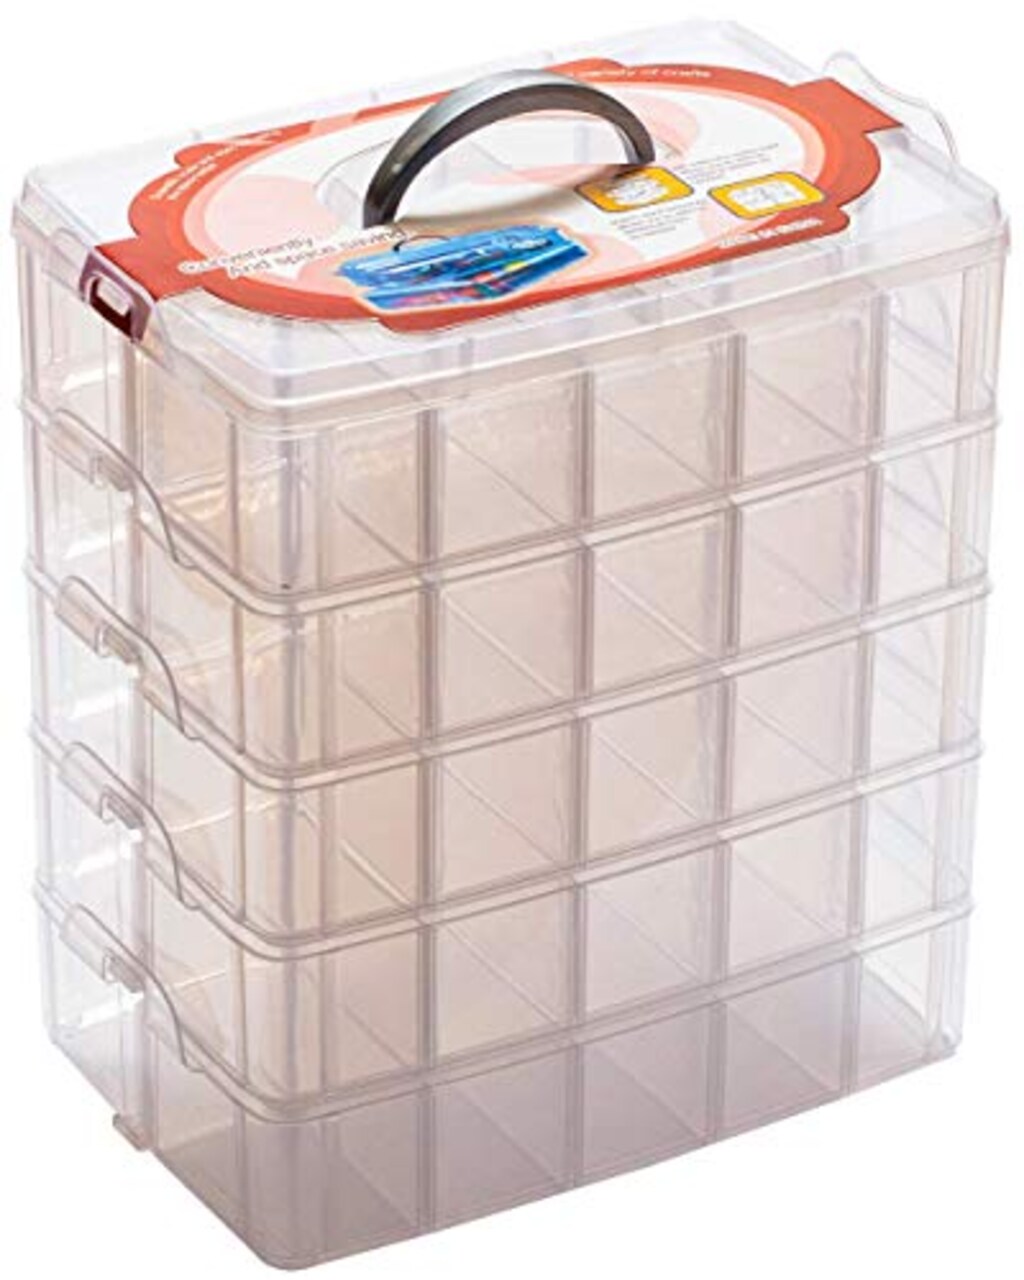 Sooyee 5 Layers Stackable Storage Container Clear 50 Adjustable  Compartments,Compatible with Small Toys Arts and Crafts Piping Tips Hardware  Storage Organizer